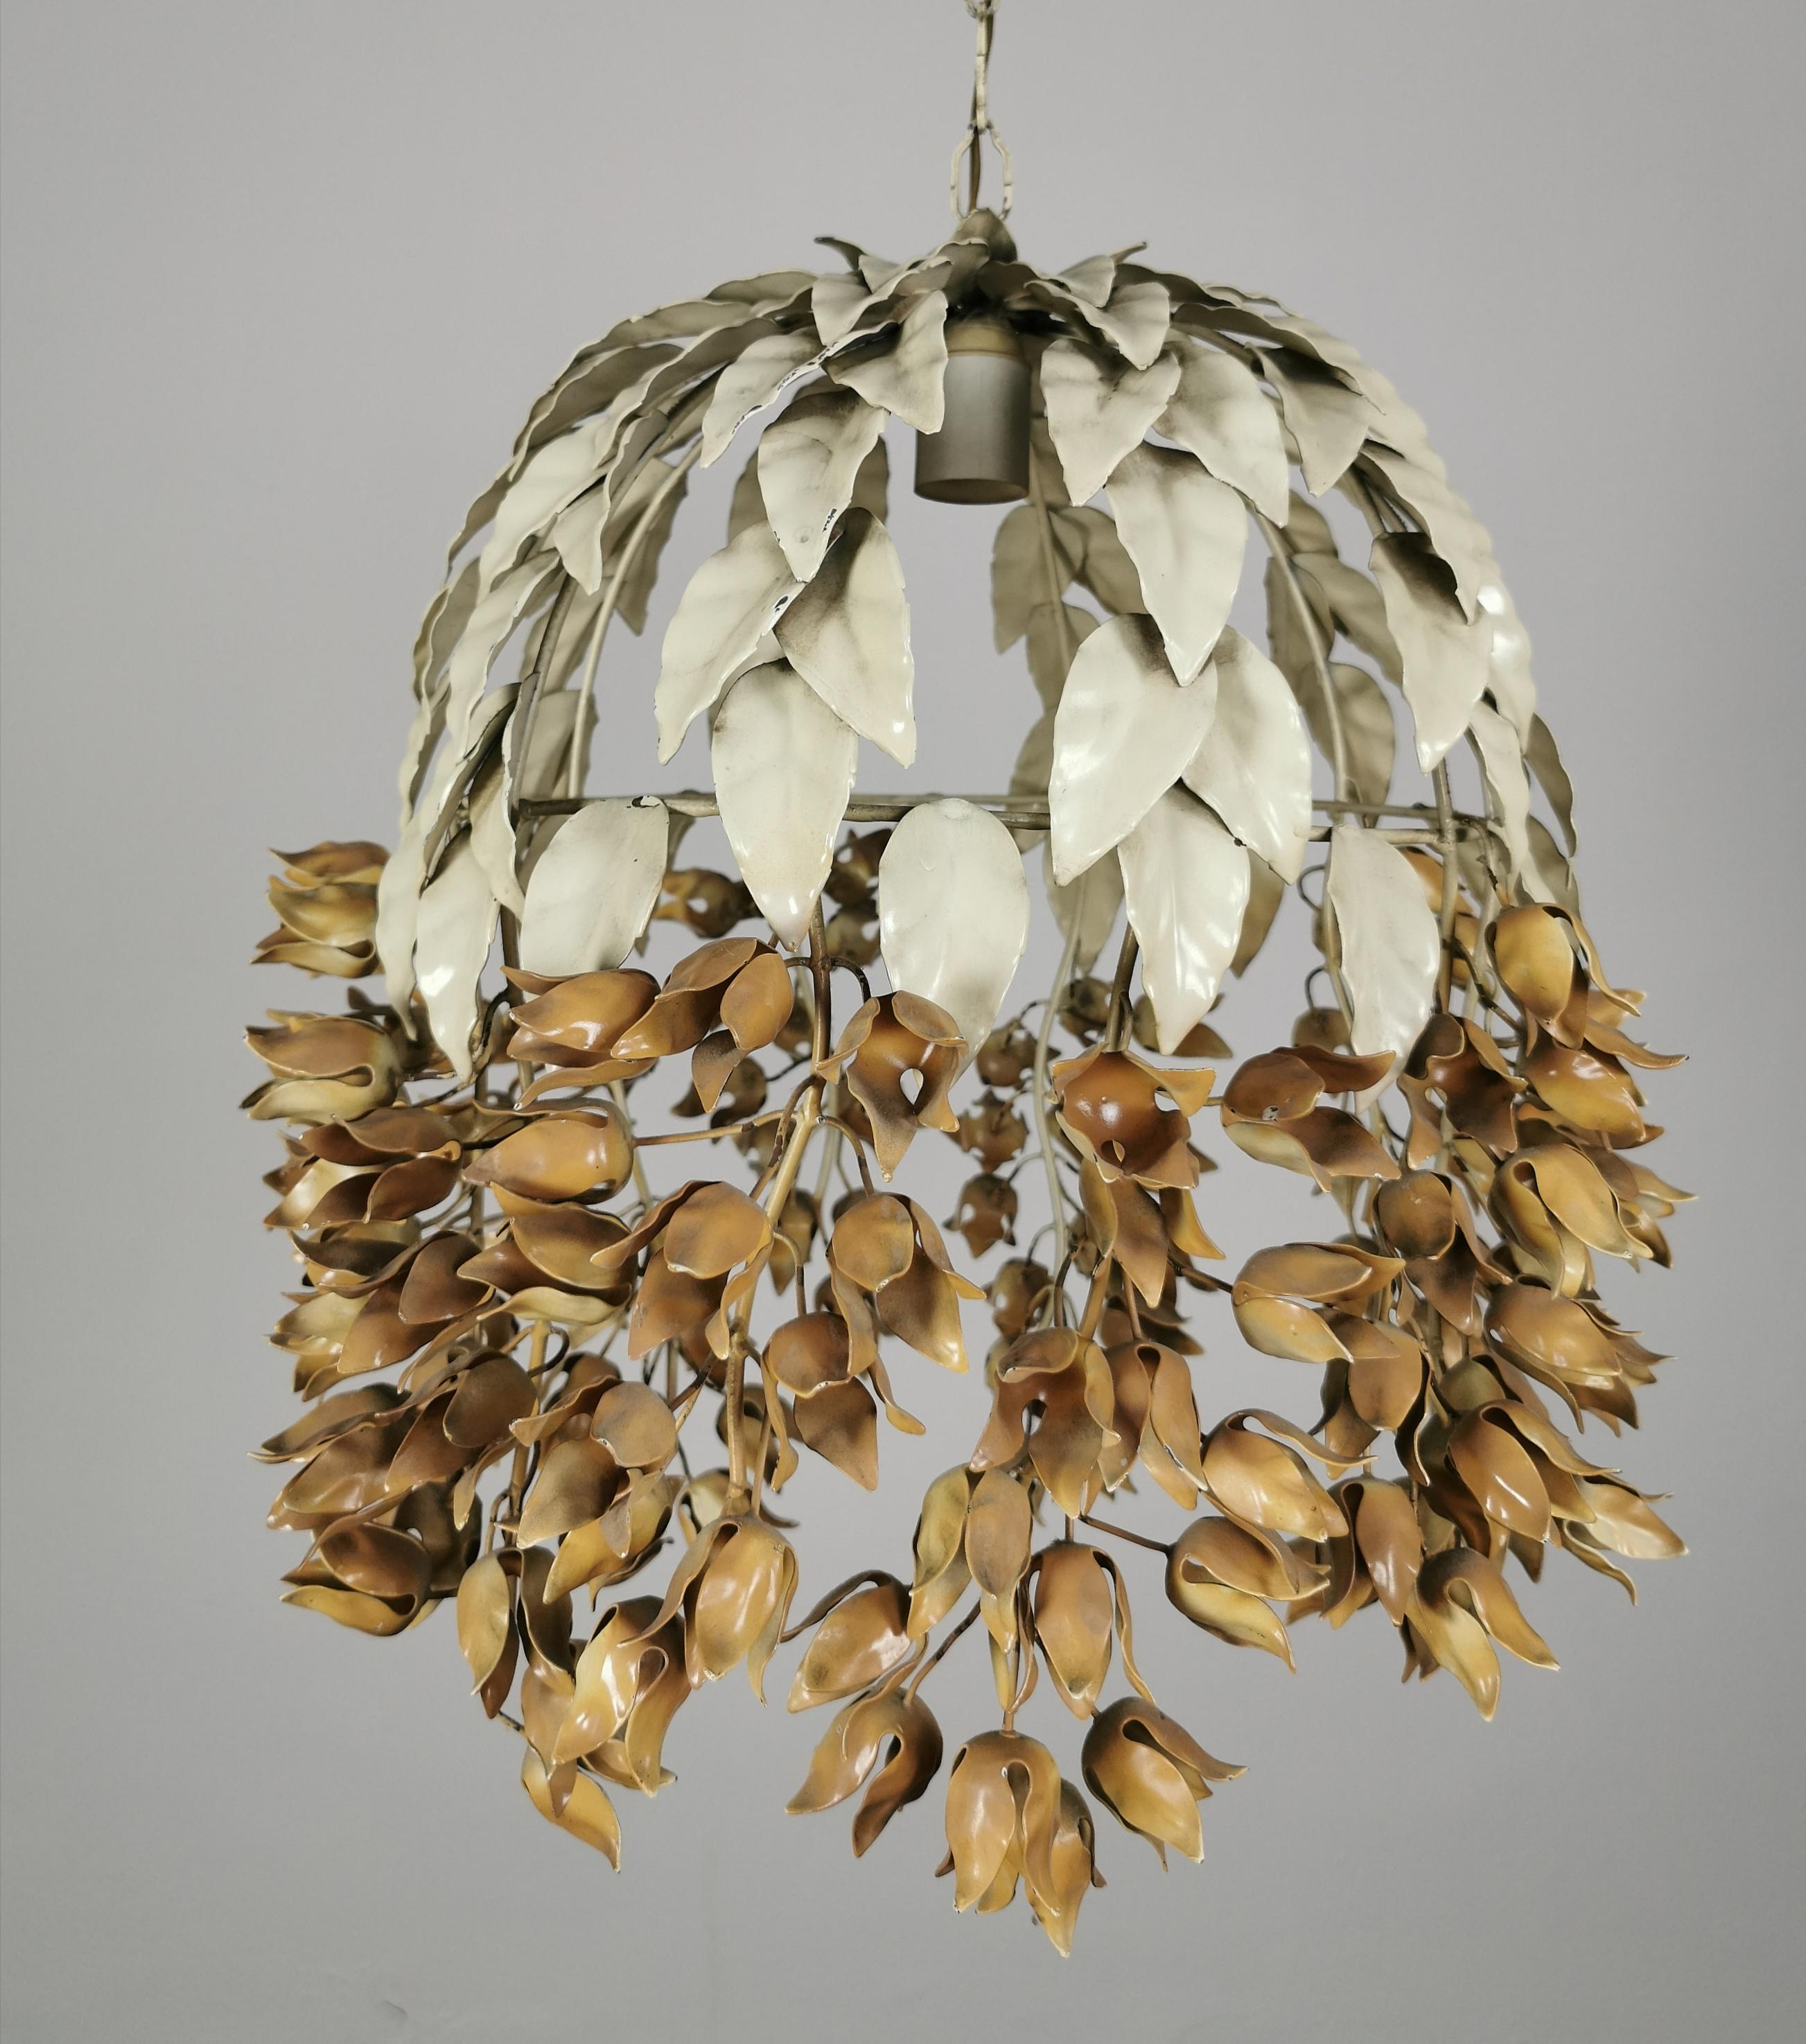 Pair of Chandeliers Pendants Enameled Metal Midcentury Italian Design 1960s In Good Condition For Sale In Palermo, IT